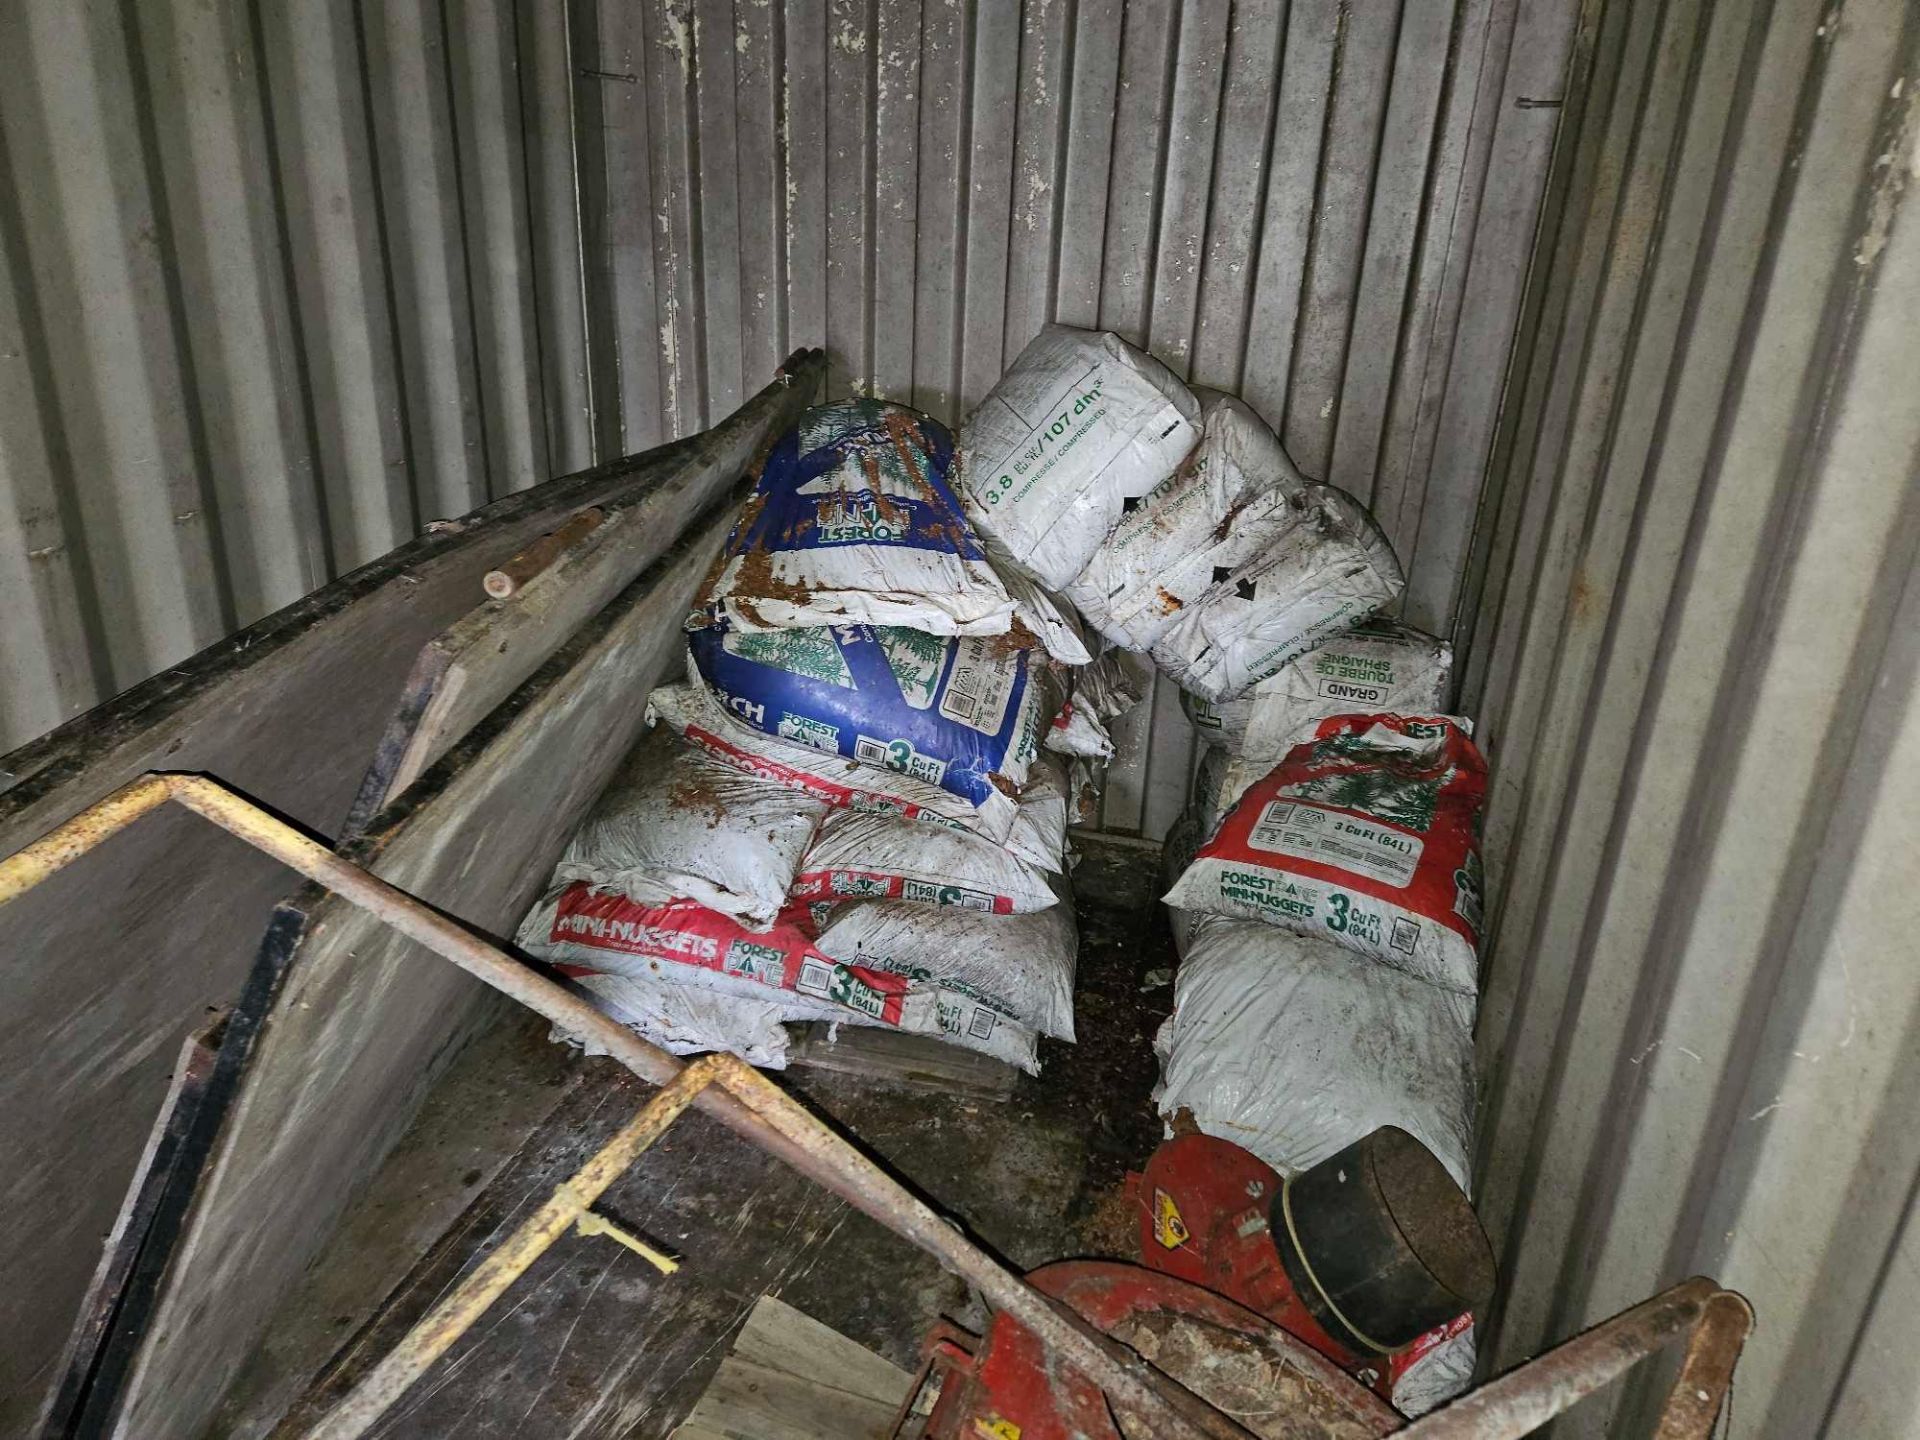 Assorted Blower Attachments/Bags of Peat Moss/Mulch & Contents of Container - Image 4 of 6